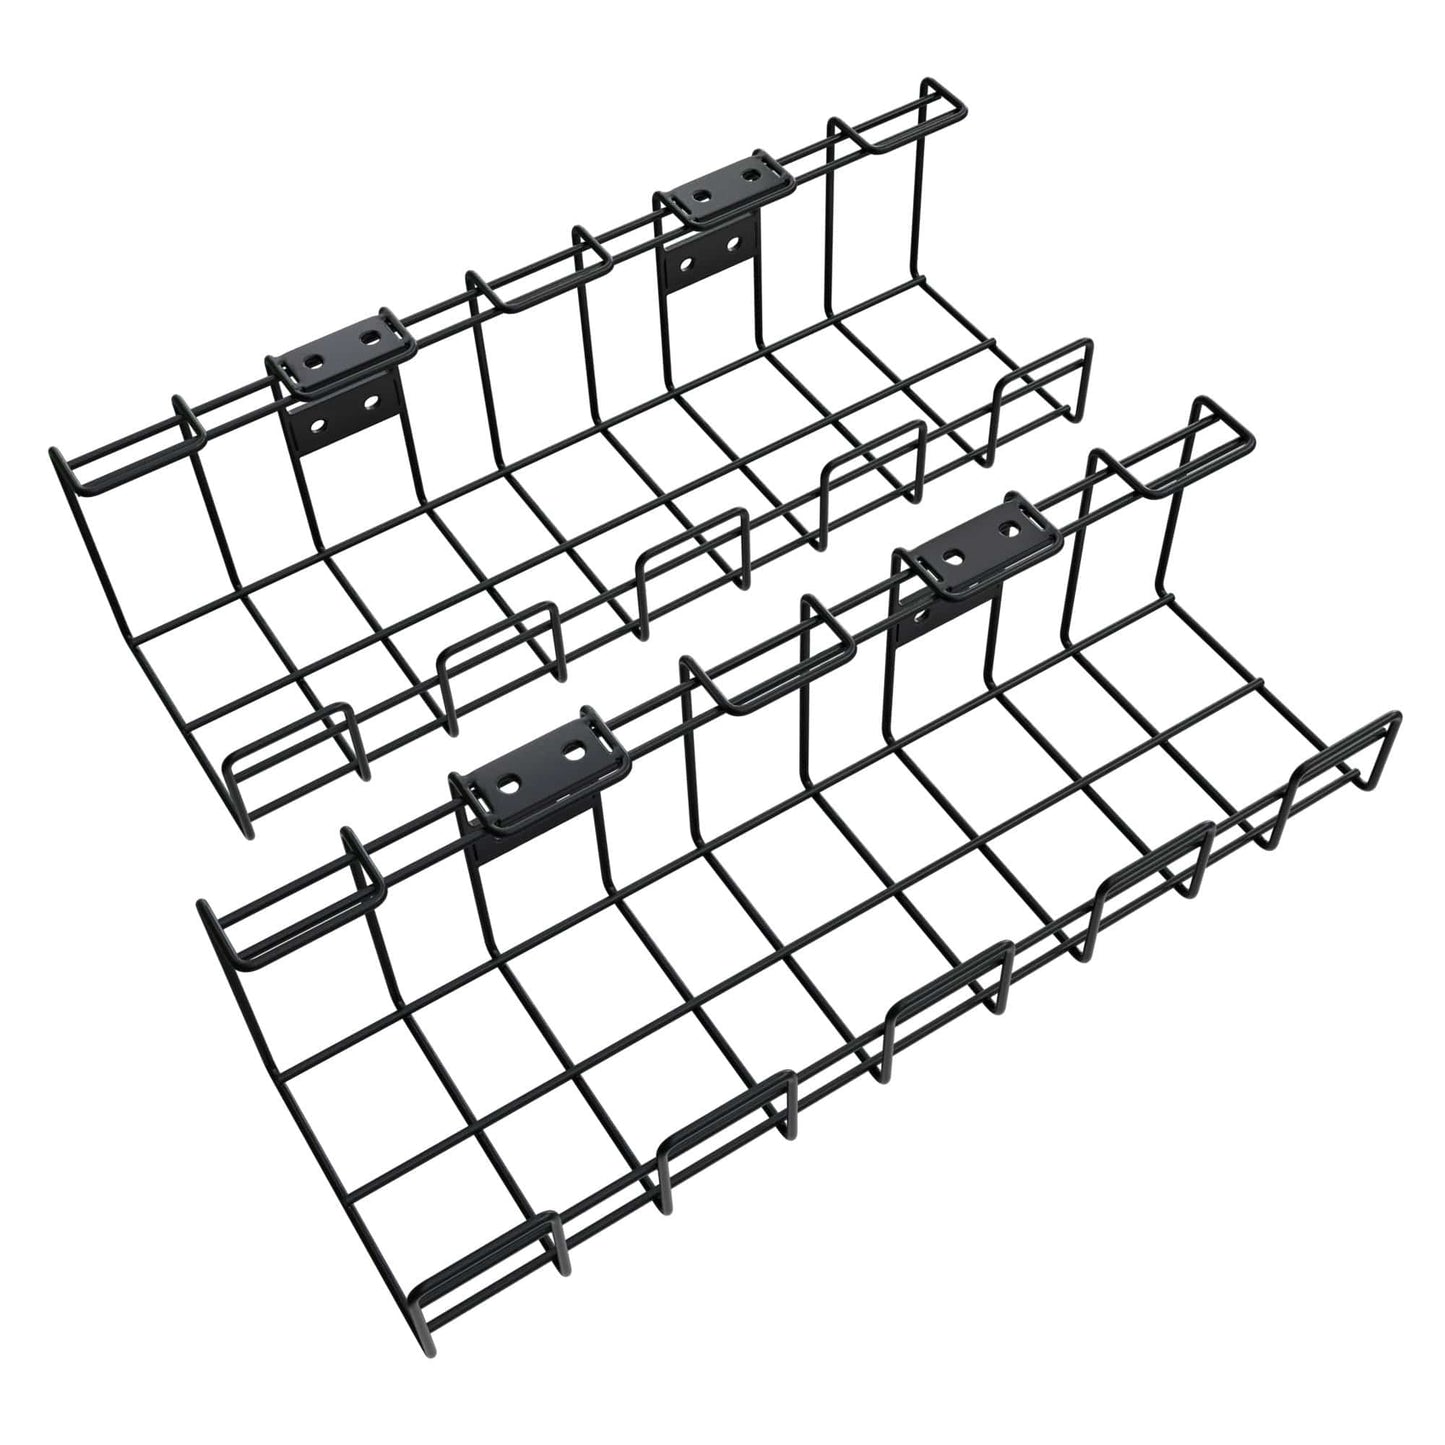 KD Essentials – Metal cable basket, twin pack – cable bracket and tray